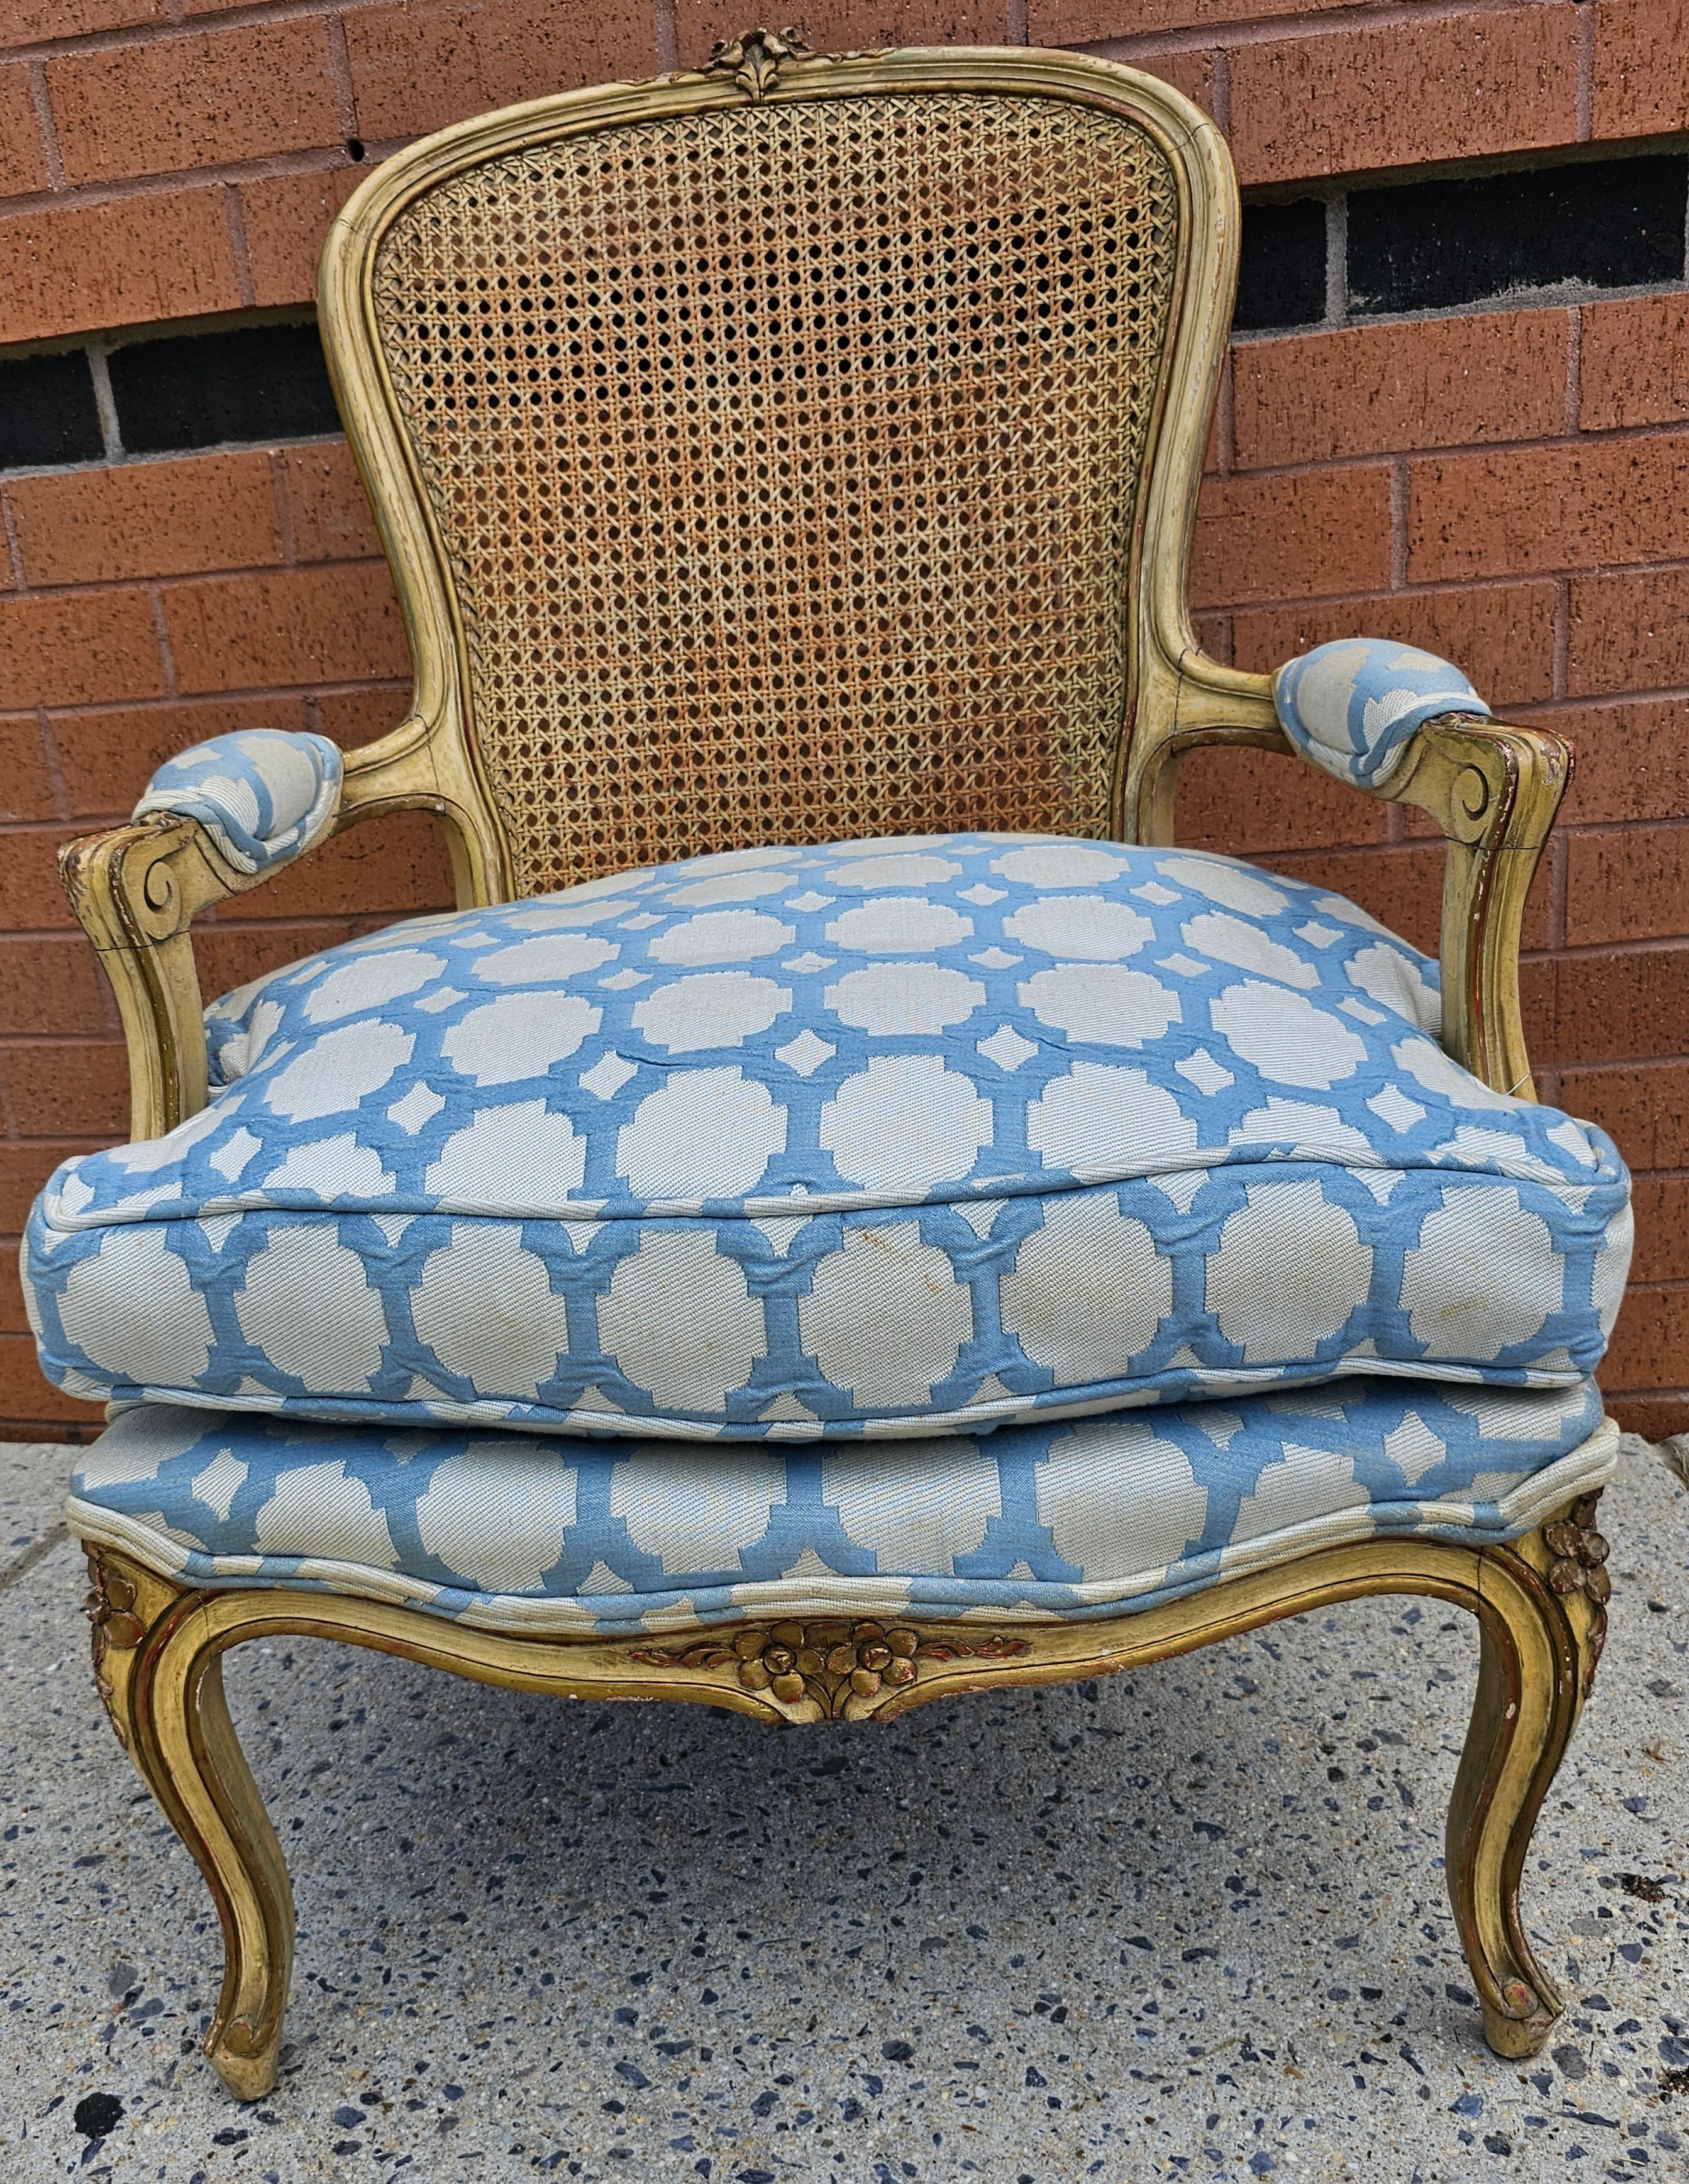 French Provincial Provincial Yellowish Enamel, Caned Back And Upholstered Seat Bergere Chair For Sale